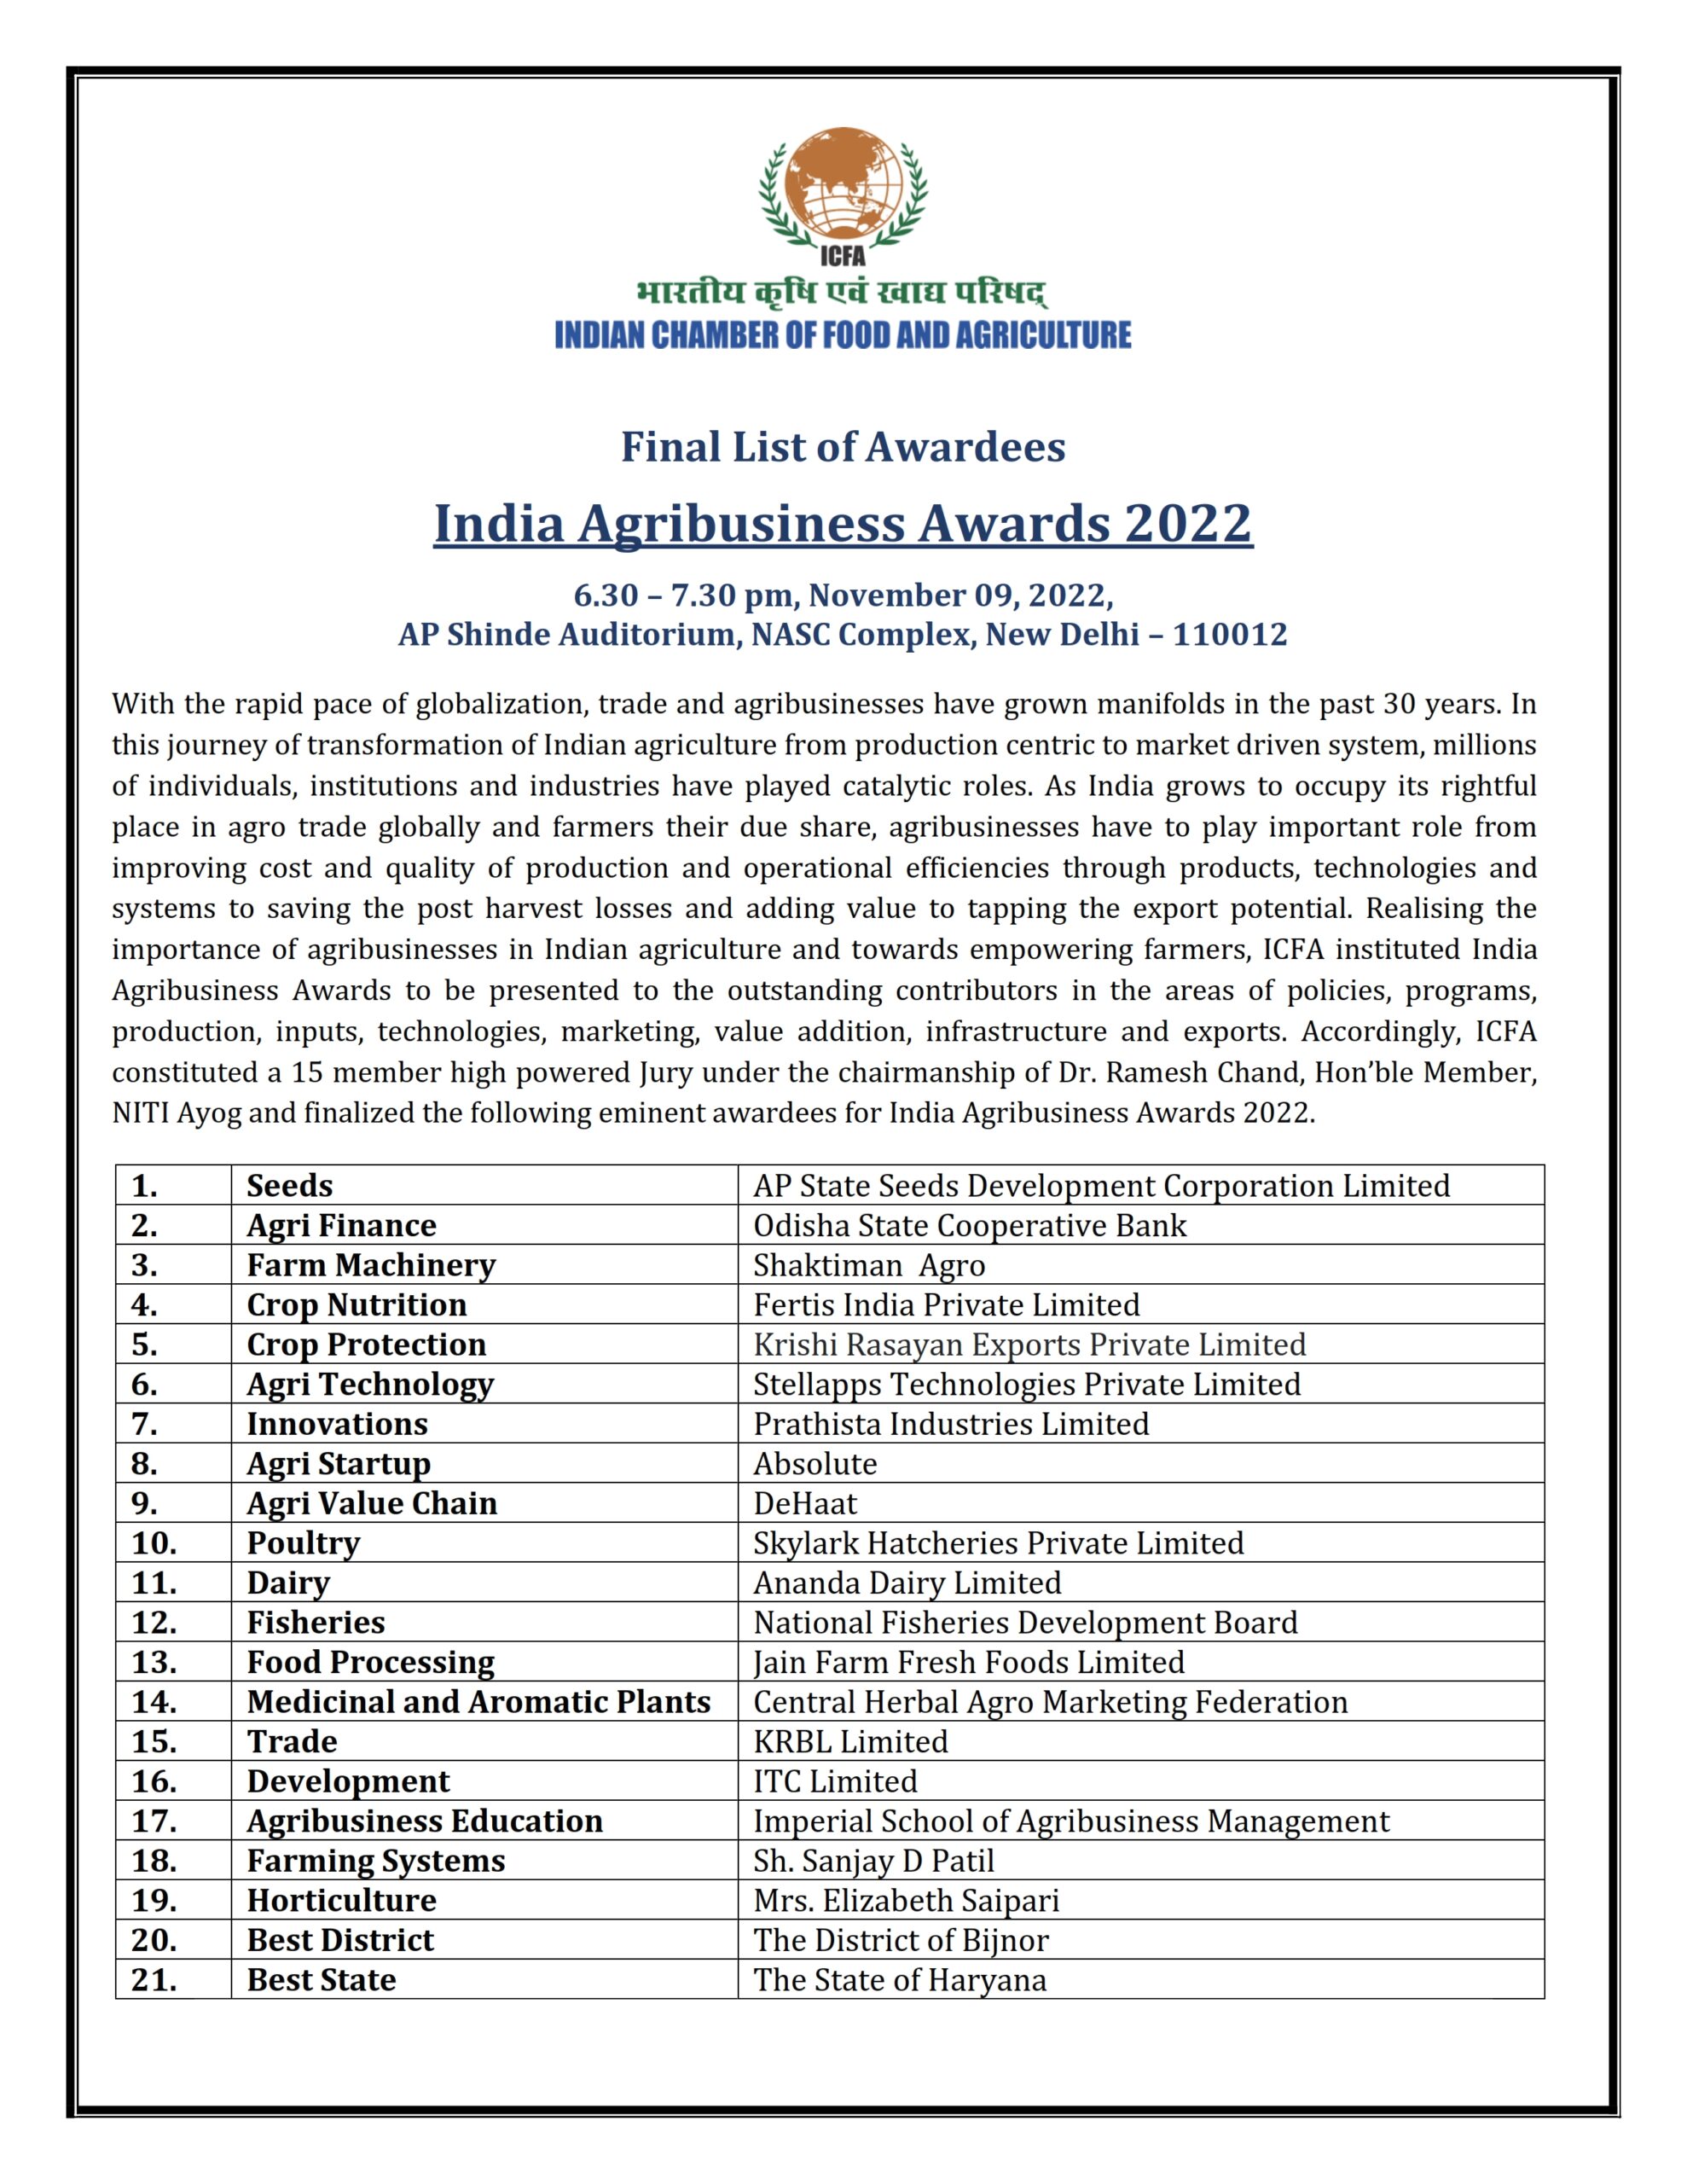 Hon’ble Chancellor – Dr. Sanjay D. Patil has been awarded as India Agribusiness Awards 2022